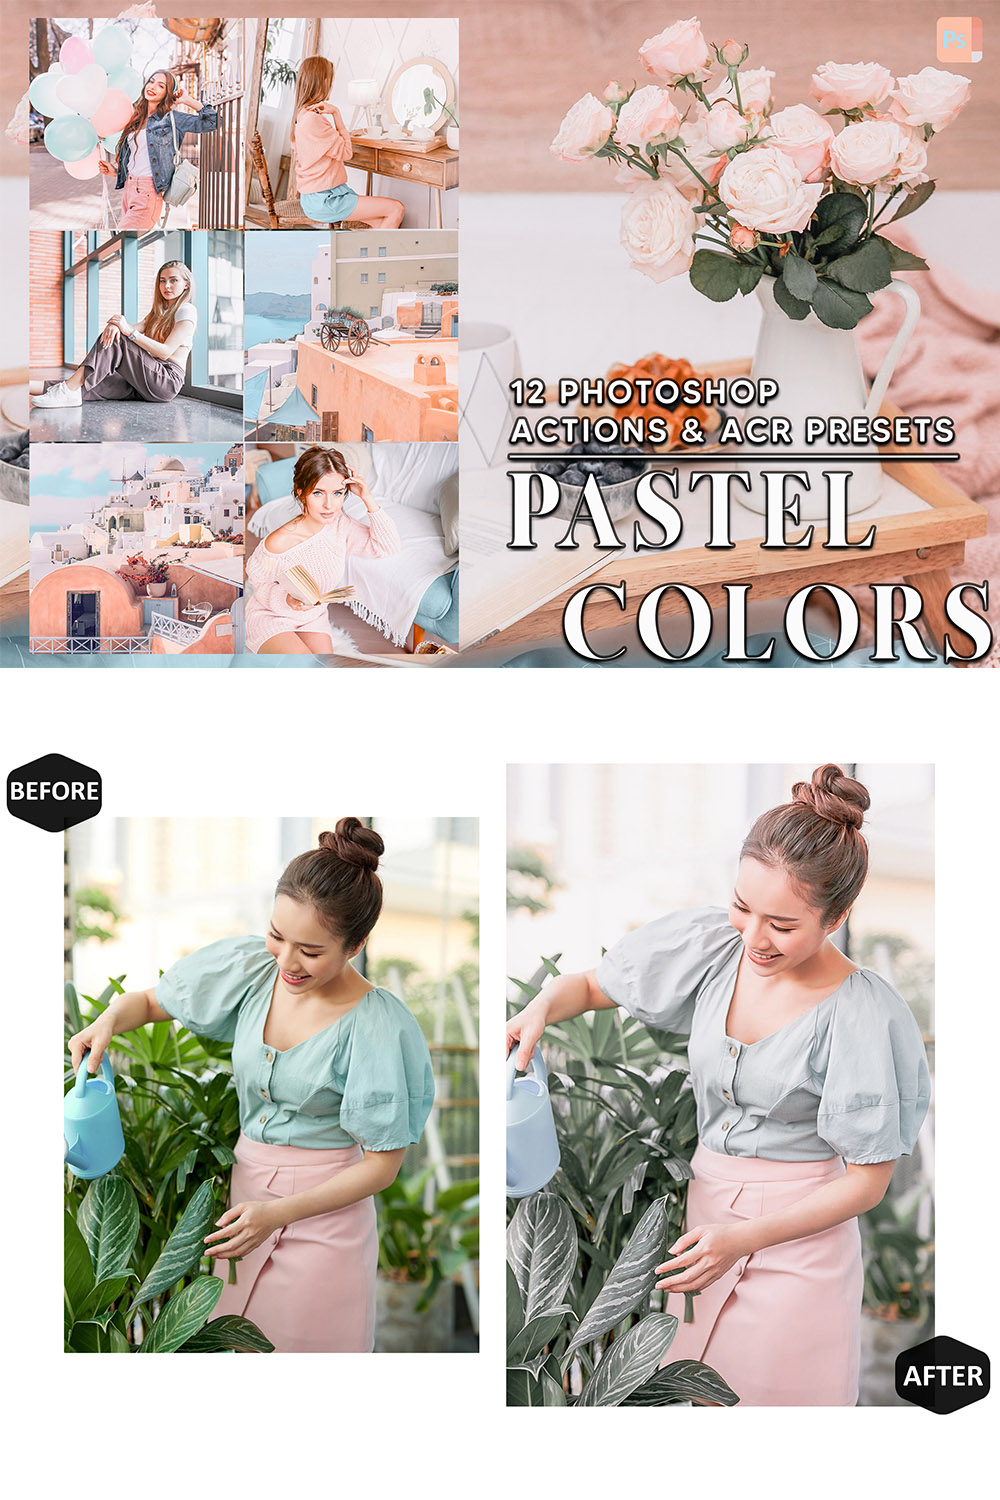 12 Photoshop Actions, Pastel Colors Ps Action, Bright ACR Preset, Spring Girl Ps Filter, Atn Portrait And Lifestyle Theme For Instagram, Blogger pinterest preview image.